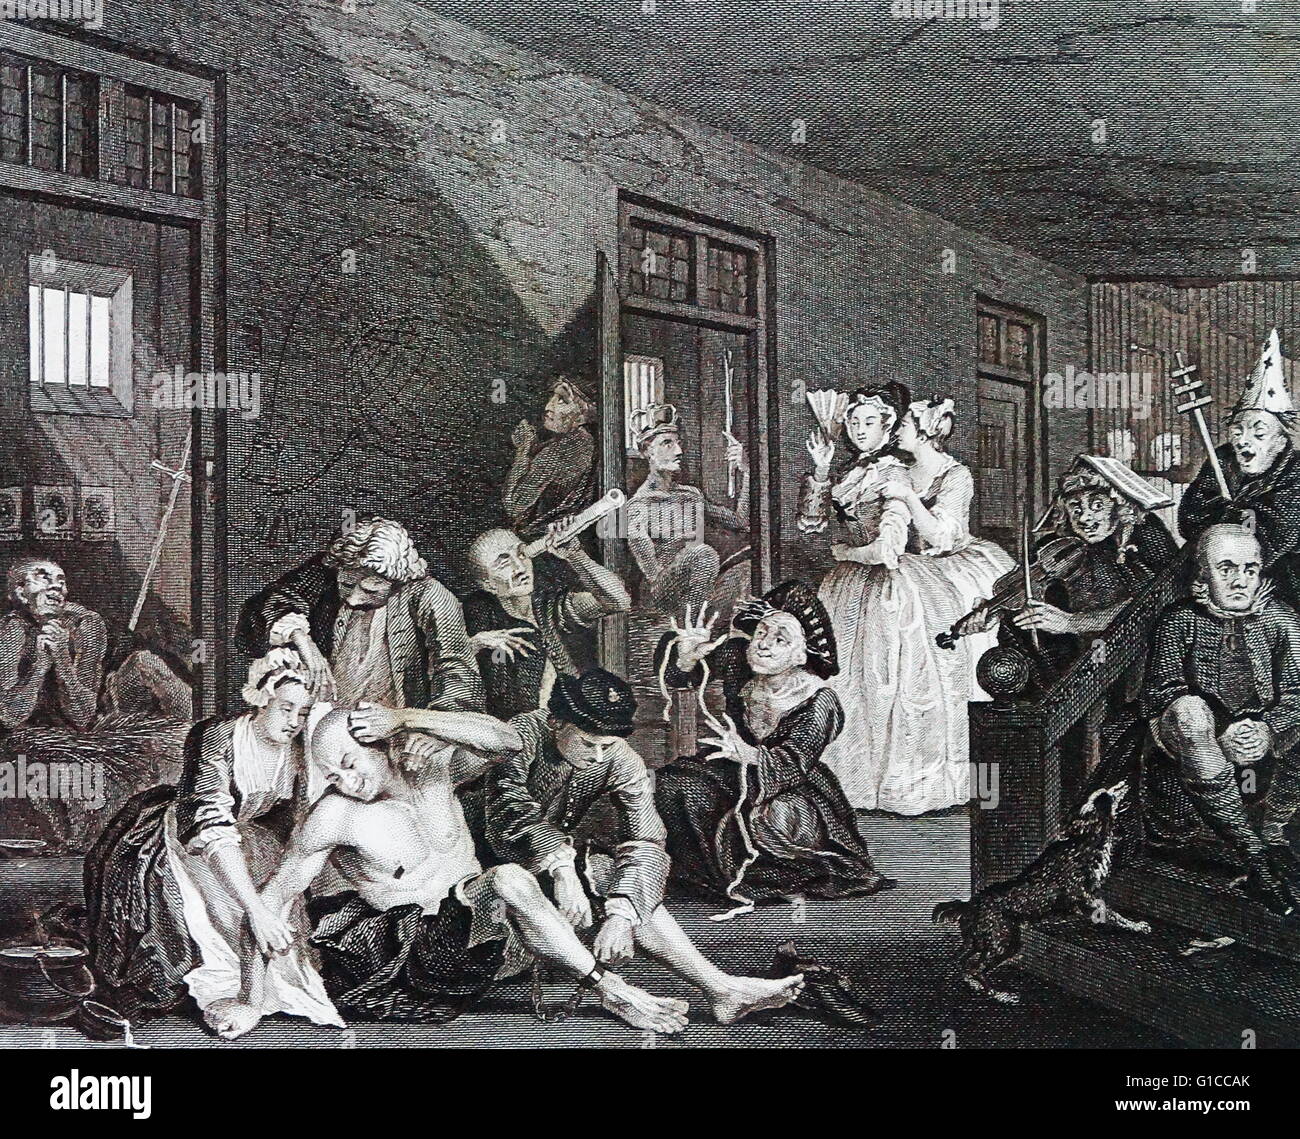 Bedlam from 'A Rake's Progress' 1733, By William Hogarth (1697 – 1764). English painter, printmaker, satirist. The series shows the decline and fall of Tom Rakewell, the spendthrift son and heir of a rich merchant, who comes to London, wastes all his money on luxurious living, prostitution and gambling Finally insane and violent, in the eighth painting he ends his days in Bethlehem Hospital (Bedlam), London's celebrated mental asylum. Only Sarah Young is there to comfort him, but Rakewell continues to ignore her Stock Photo